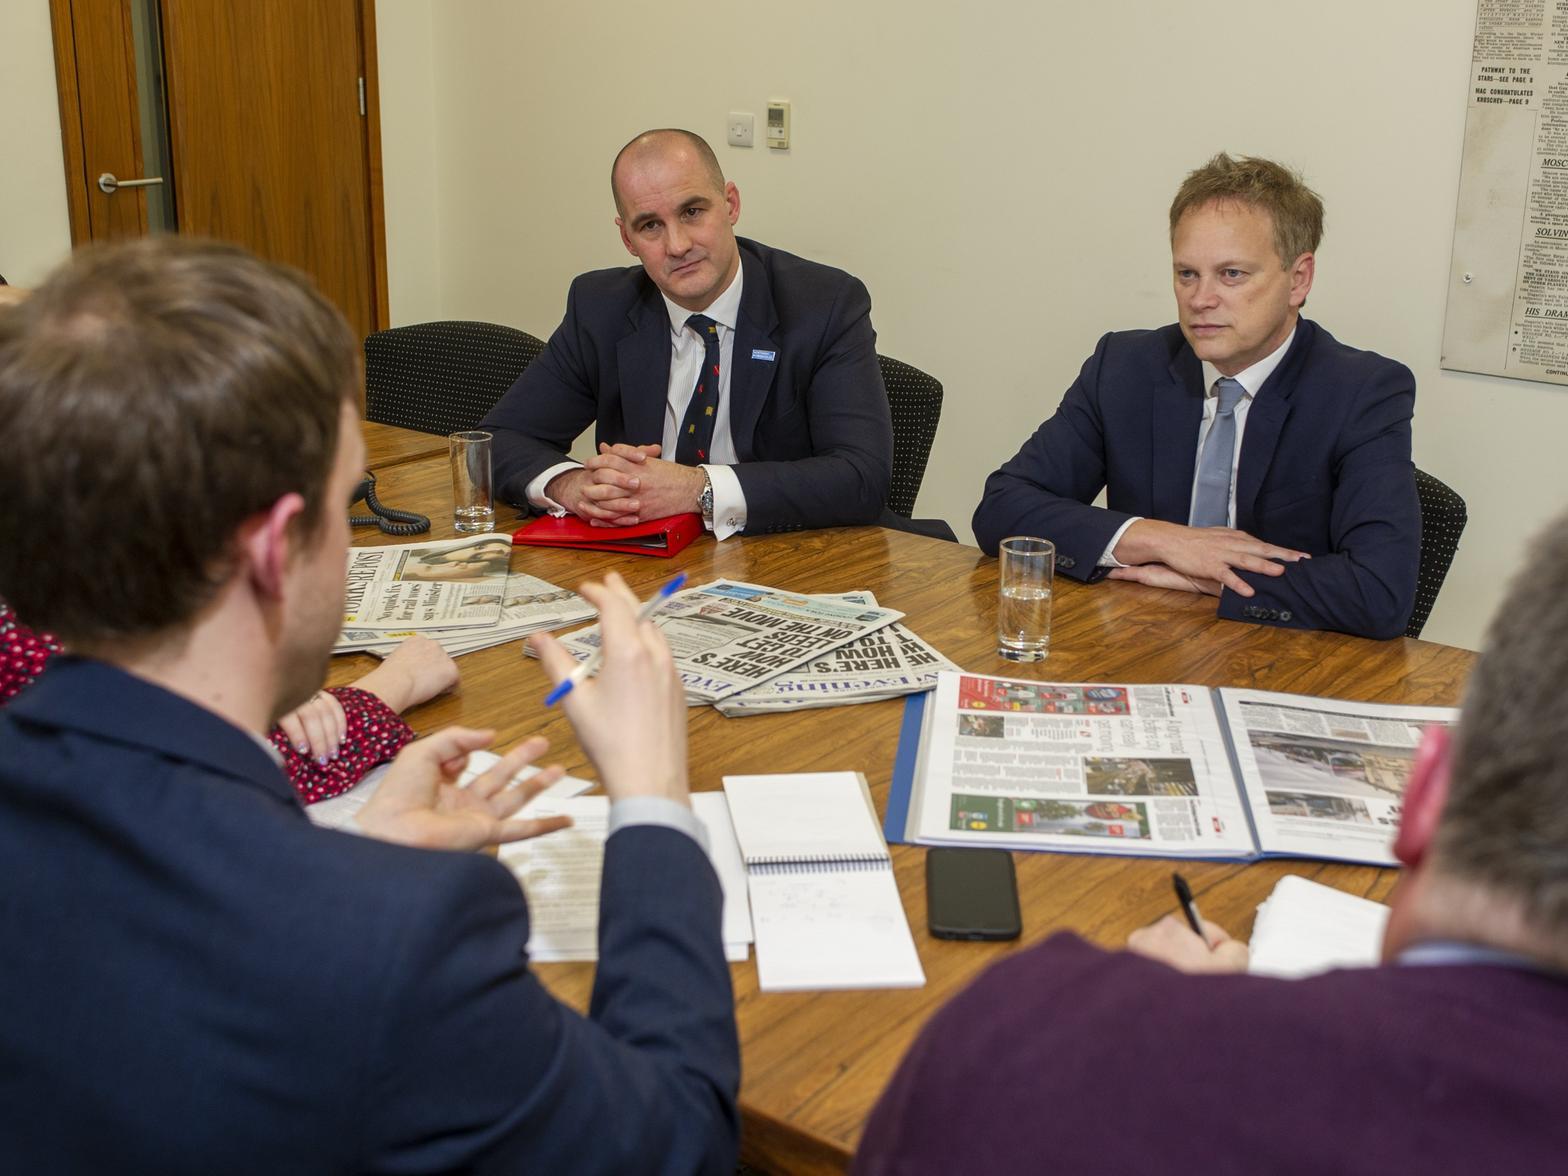 Transport Secretary Grant Shapps was shown multiple copies of the Yorkshire Evening Post, featuring stories about the city's transport crisis.